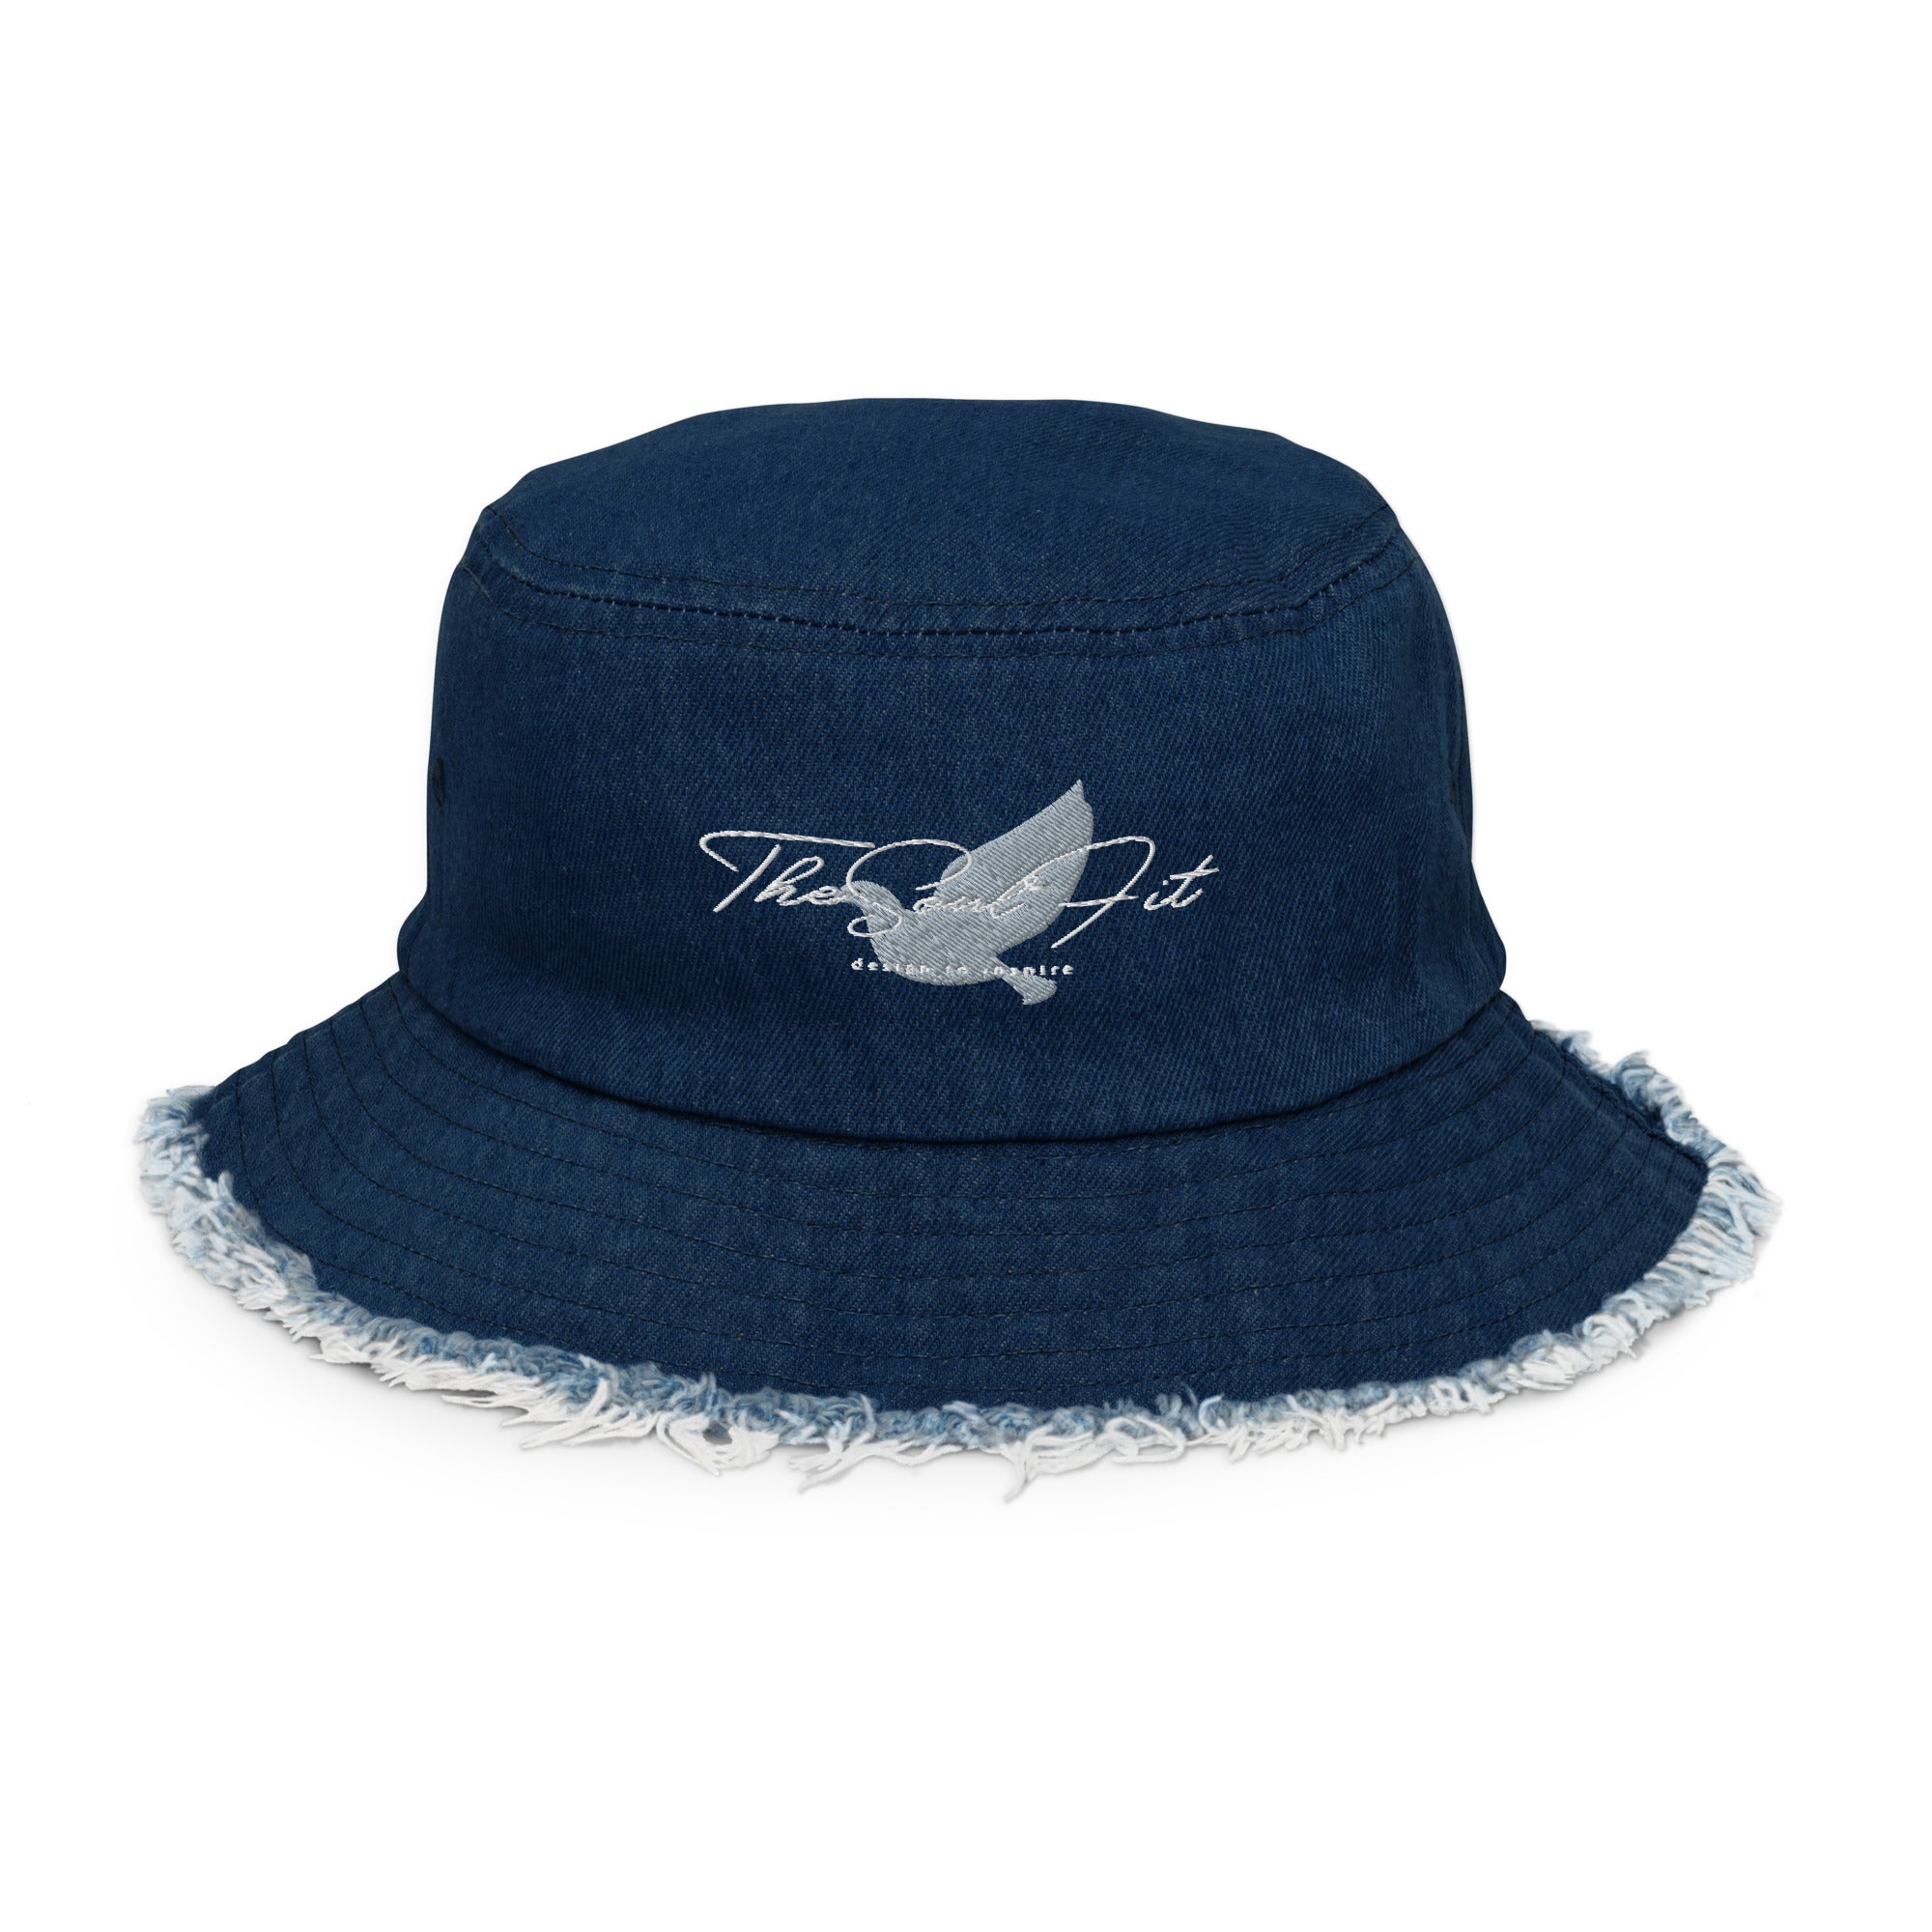 The Soul Fit Distressed denim bucket hat, Black Bucket Hat with Inspirational Logo with Dove